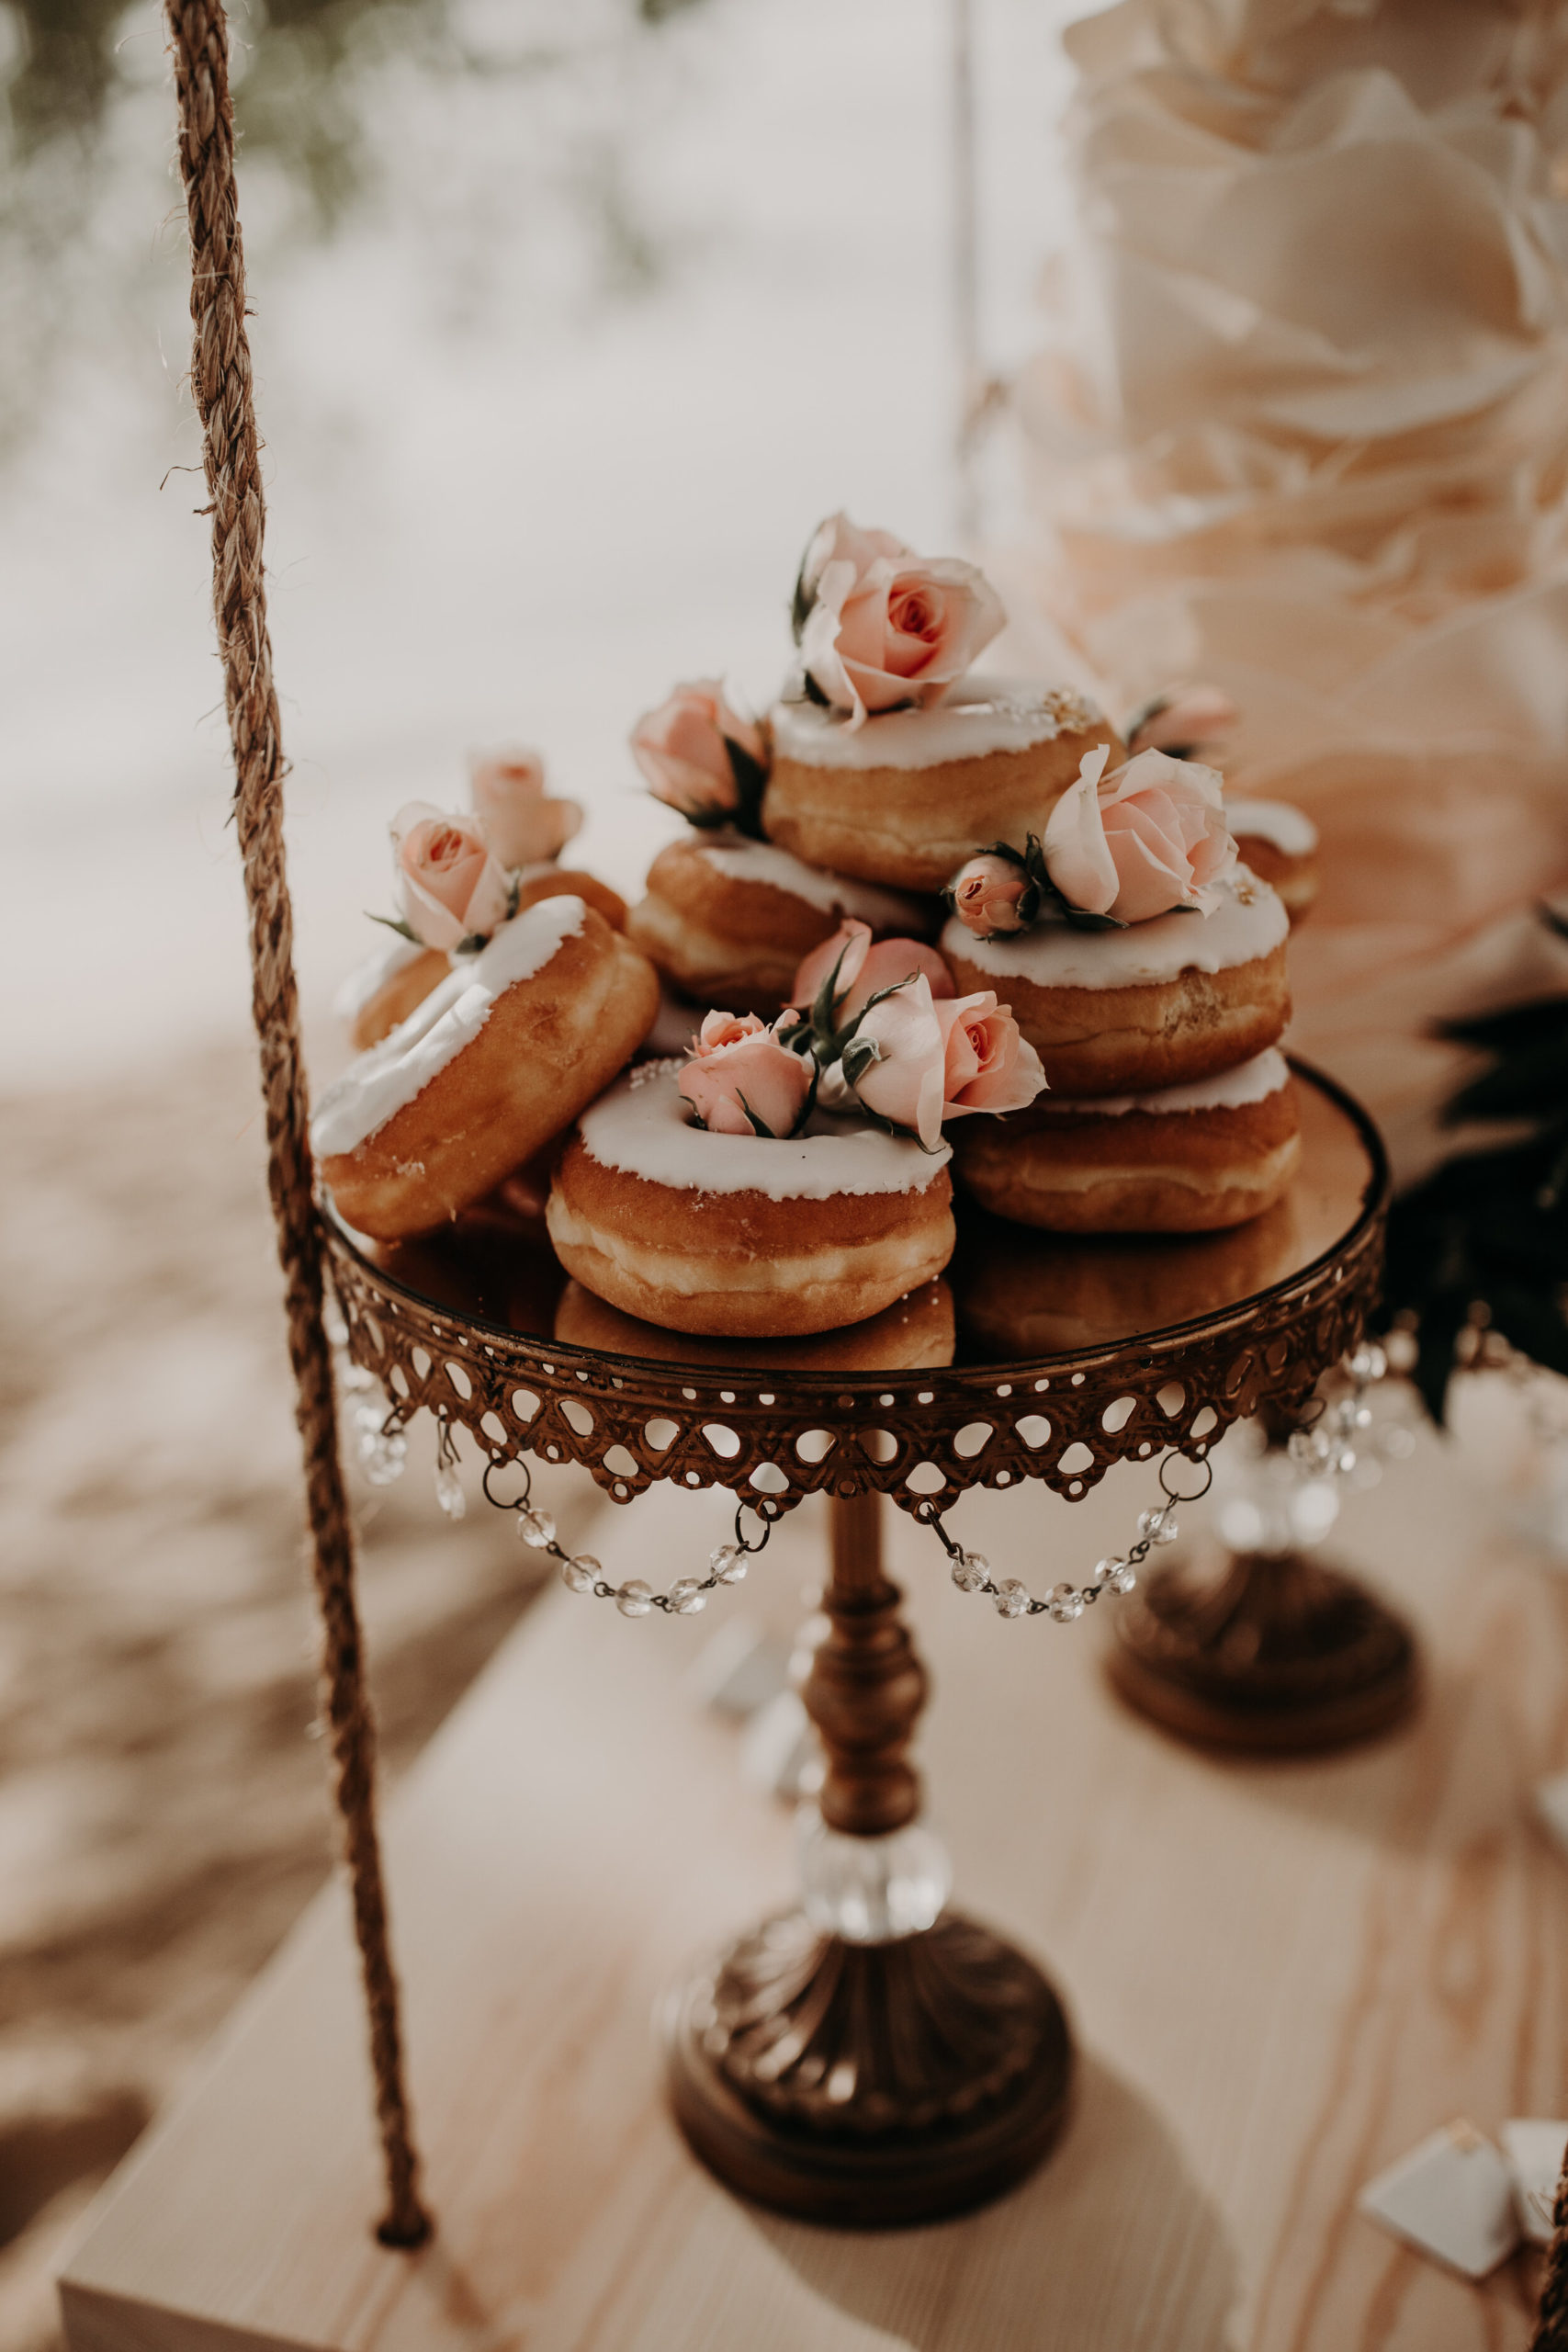 Wedding dessert display piece holding white frosted donuts with pink roses peeking between them as an accent. Out of focus, in the background is a floral tiered wedding cake.